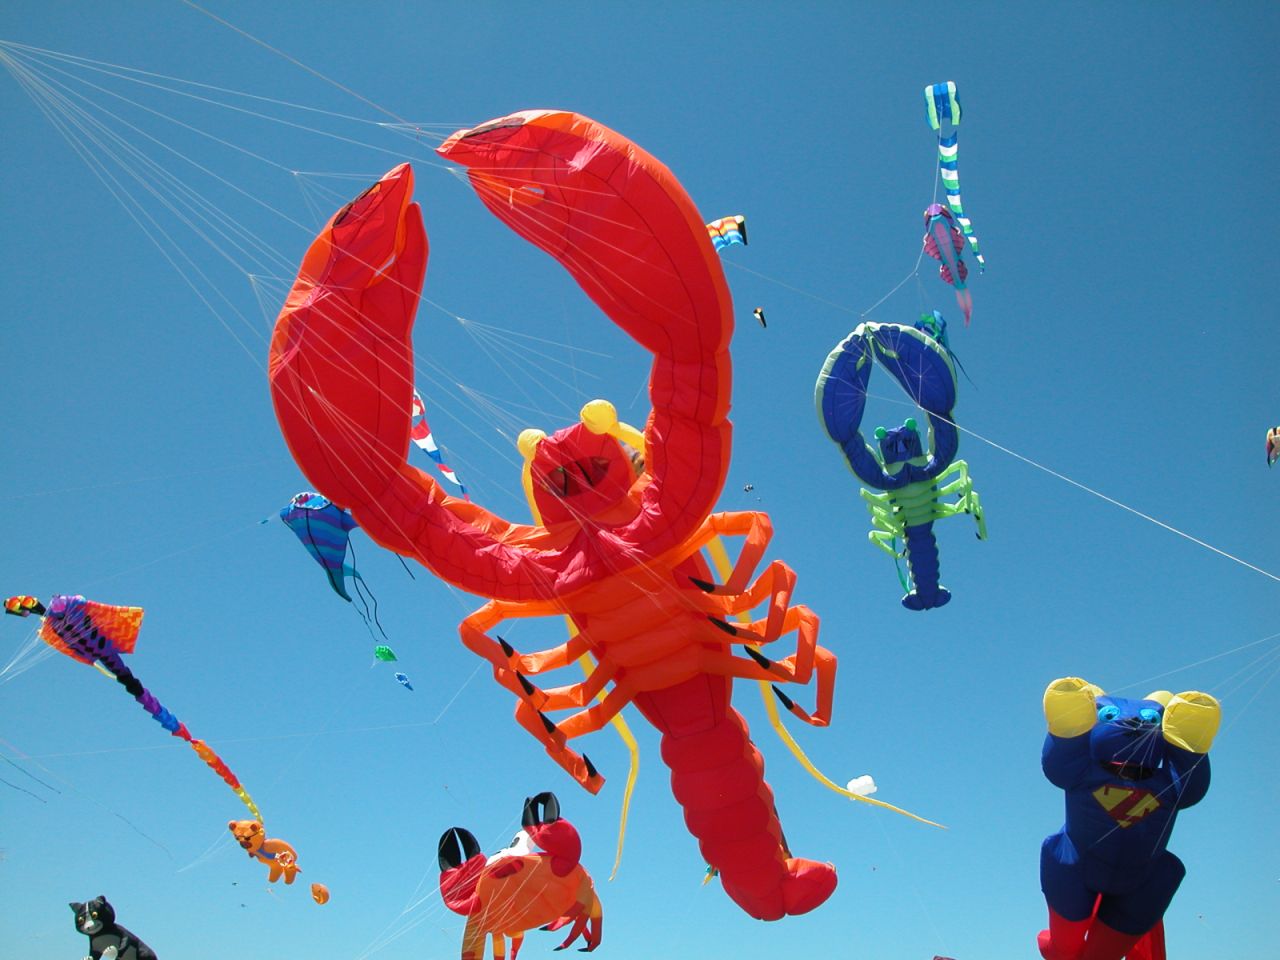 Florida's Boca Beach Club offers the unusual service of a "kite concierge". Former math teacher Randy Lowe, "the kiteman", holds a beachfront novelty kite-flying program for budding young fliers. 